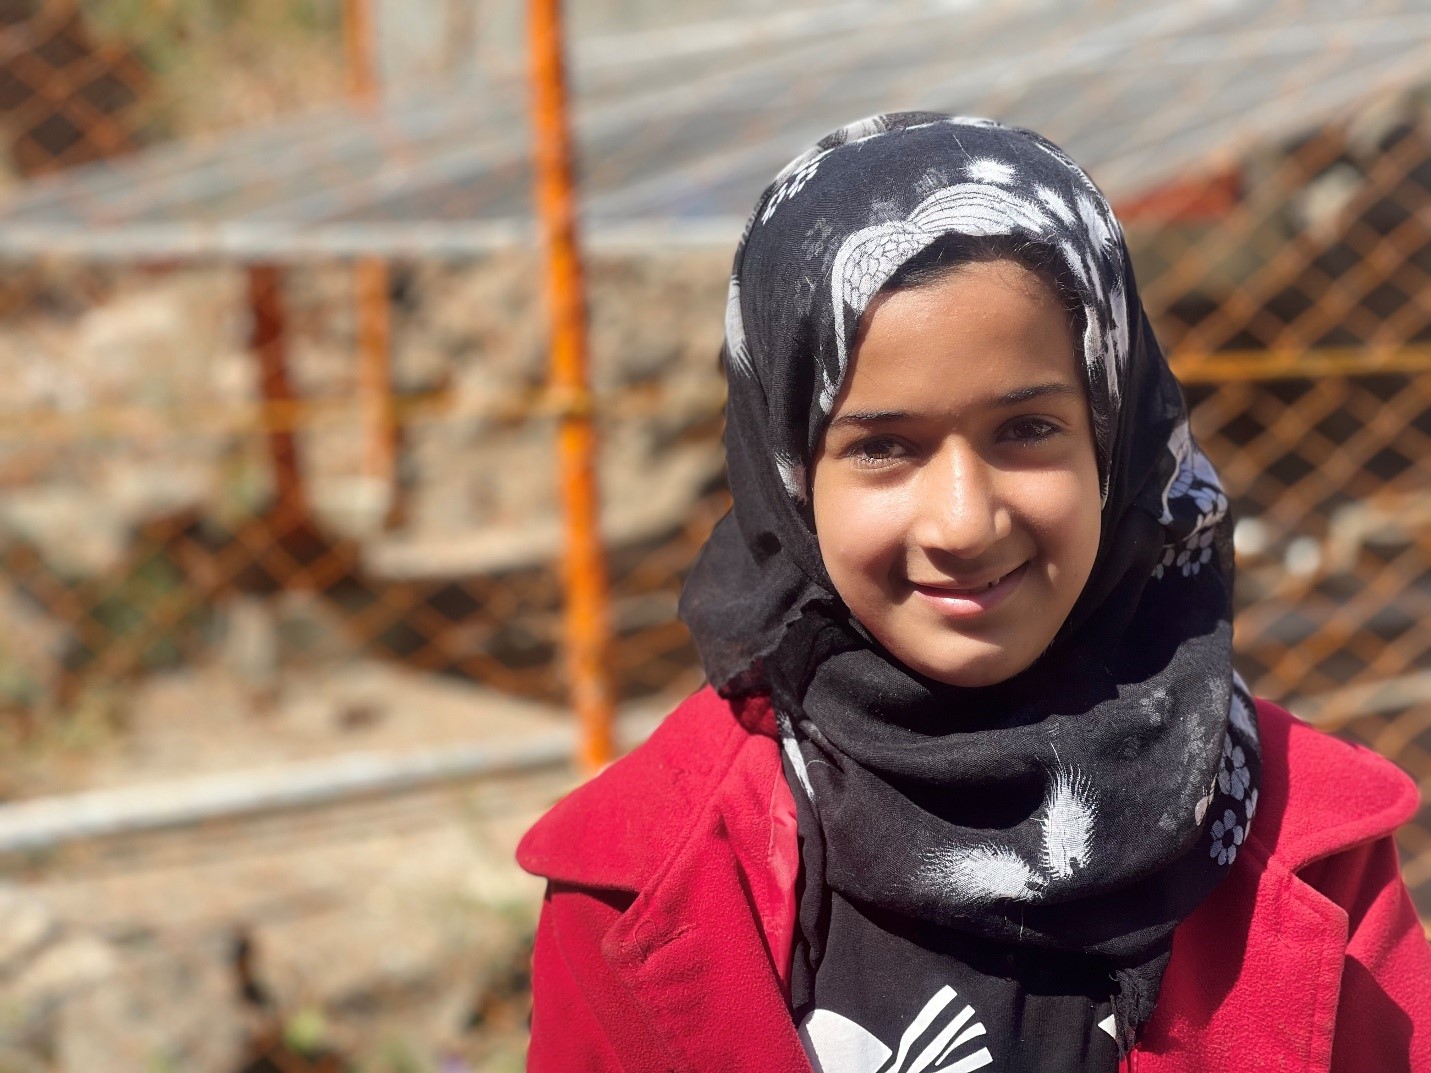 A smiling young girl in a headscarf poses for a photo.